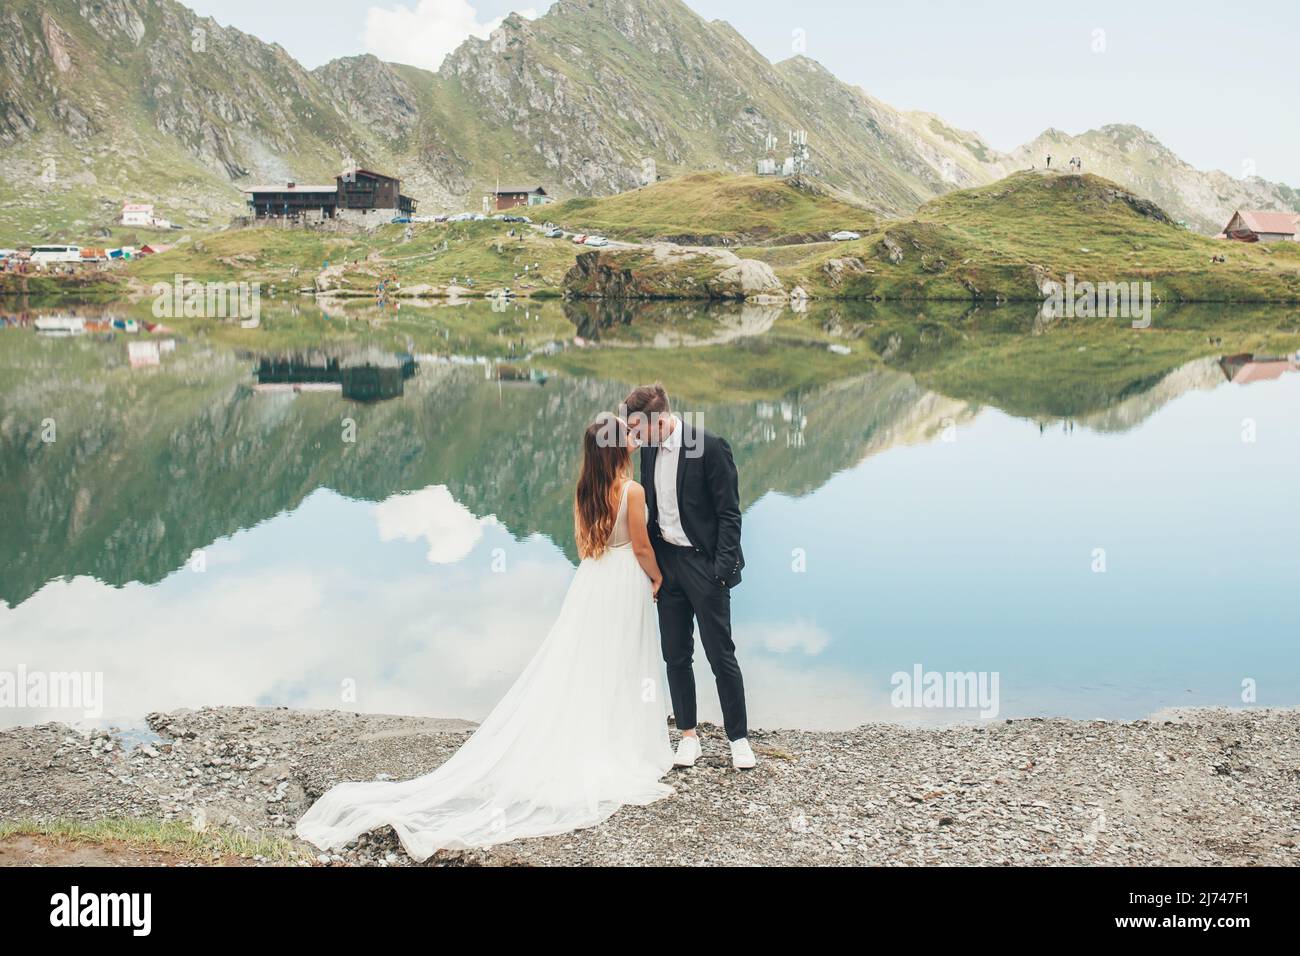 Romantic wedding couple in love standing on backdrop of a lake and mountain landscape. Happy marriage couple. Loving man and woman at marriage day. Stock Photo